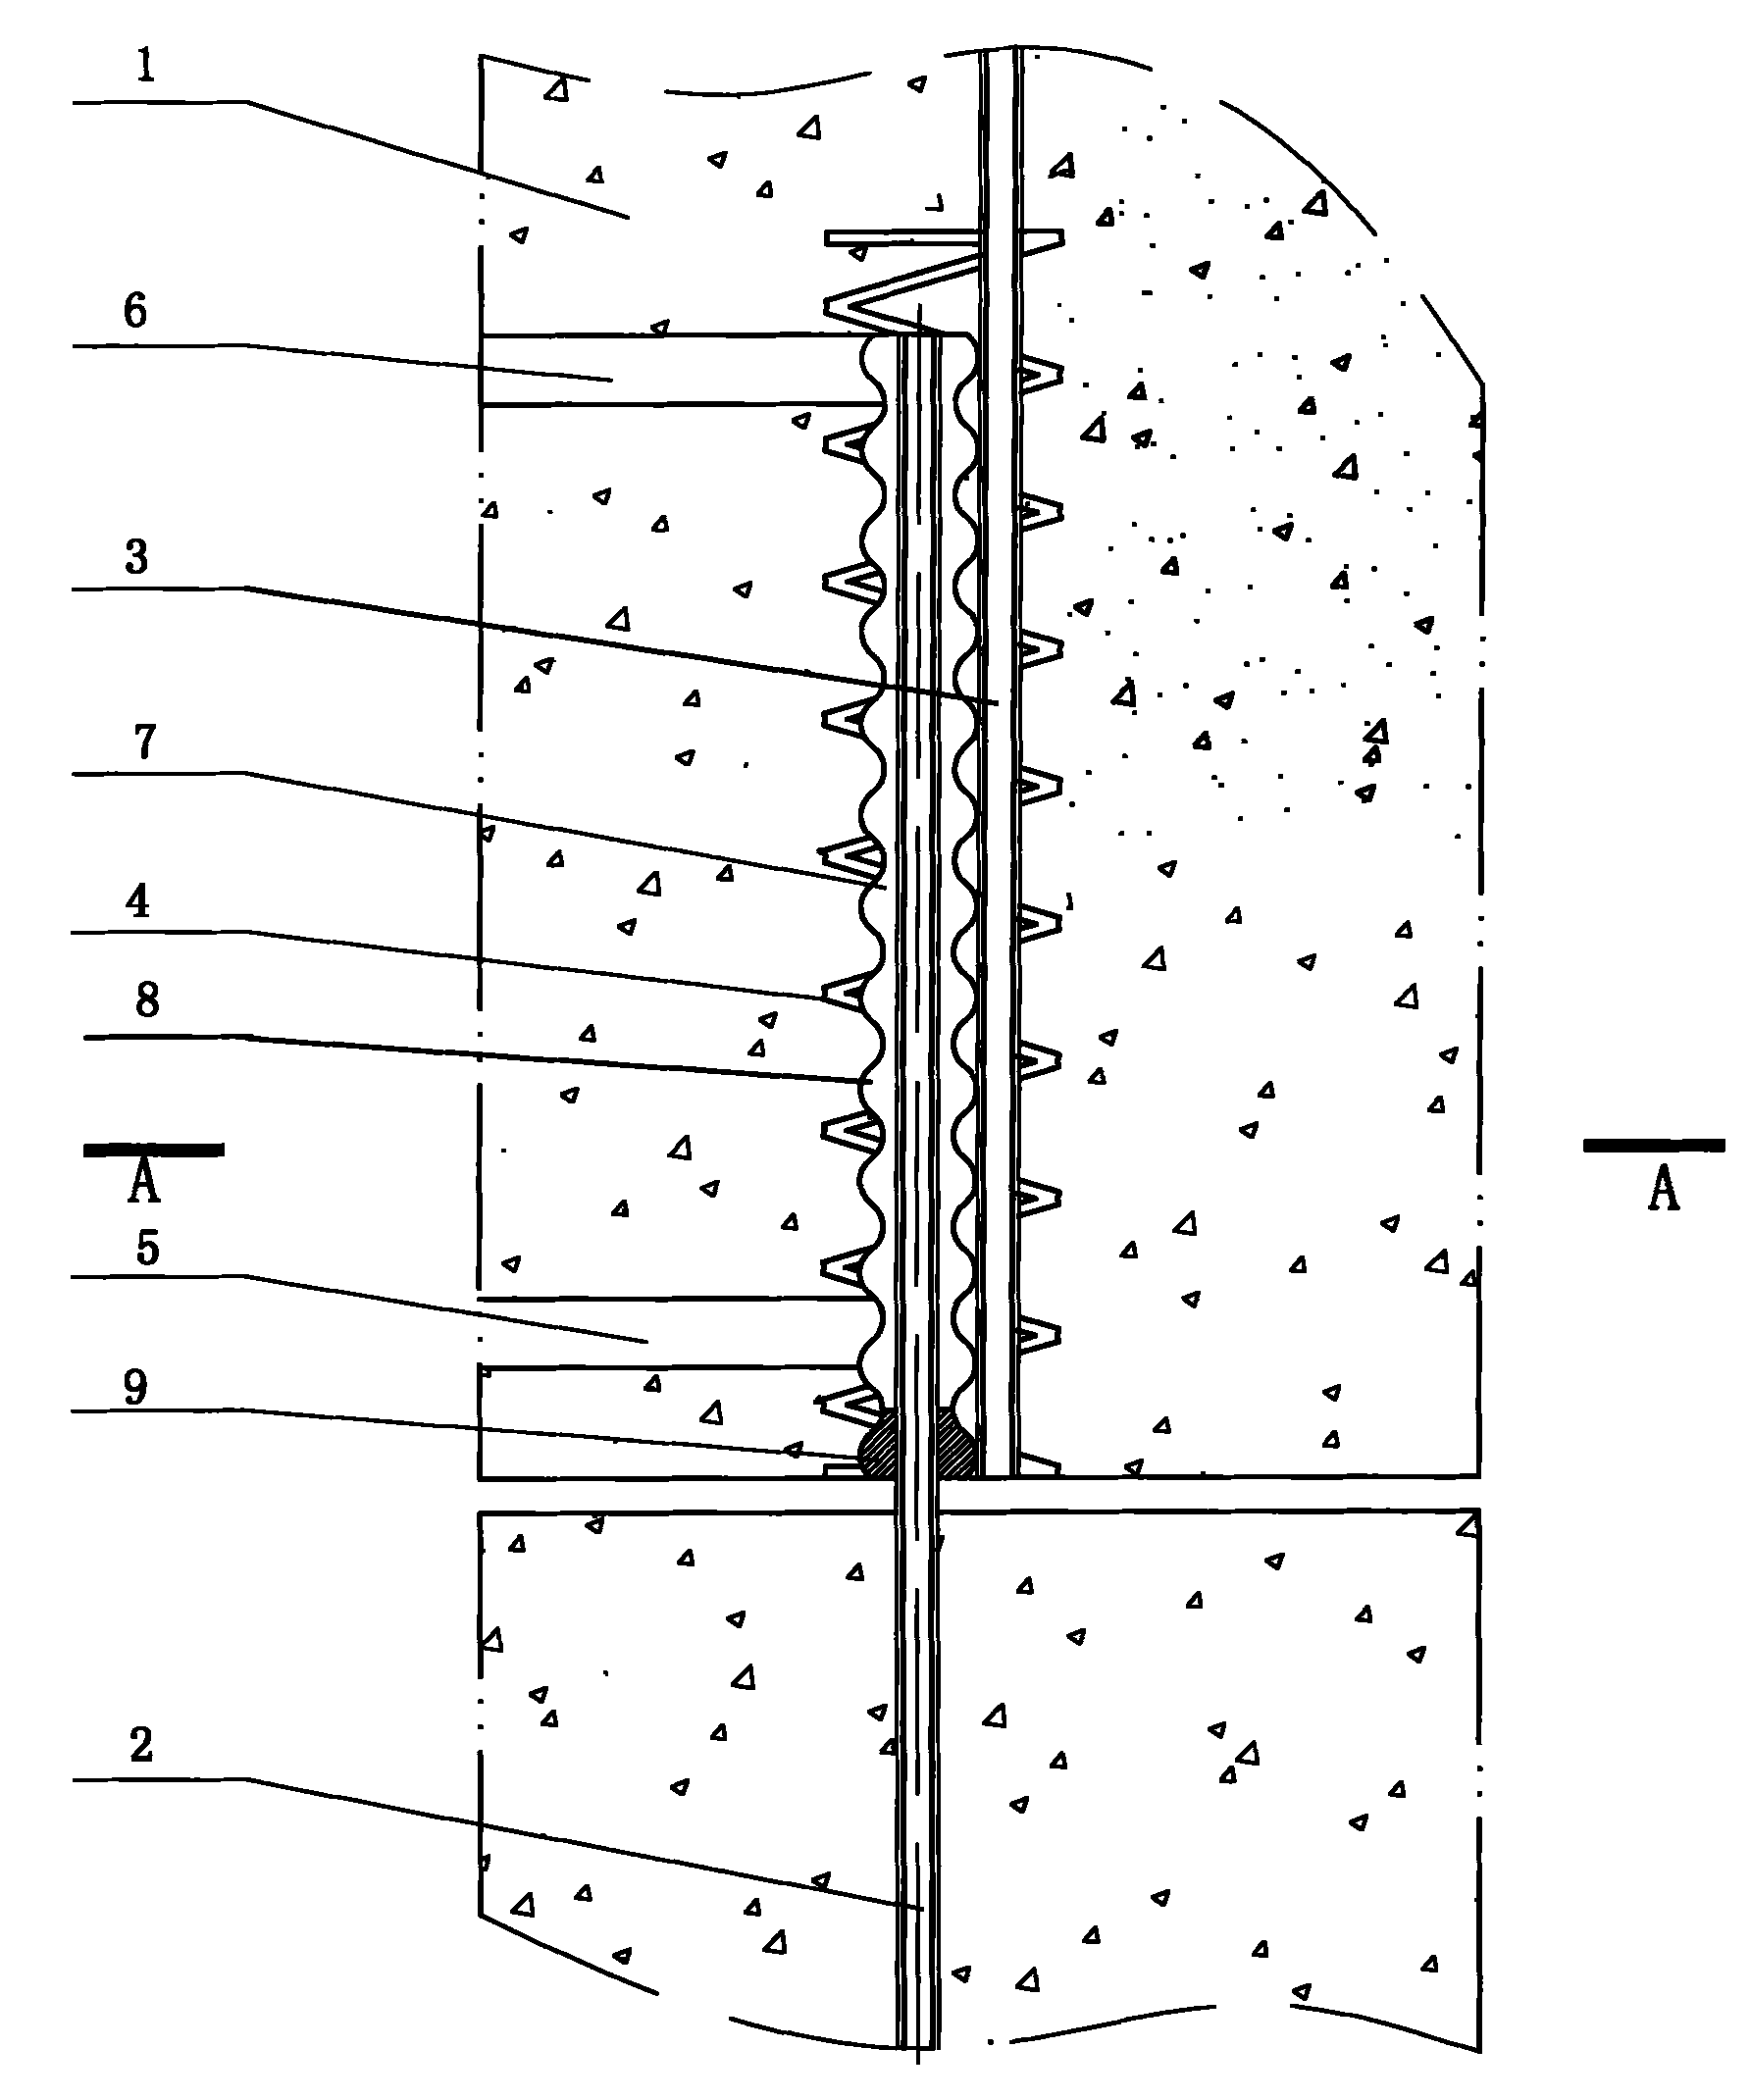 Insertion prepared hole venting reinforcing steel bar lap joint structure fabricated construction method